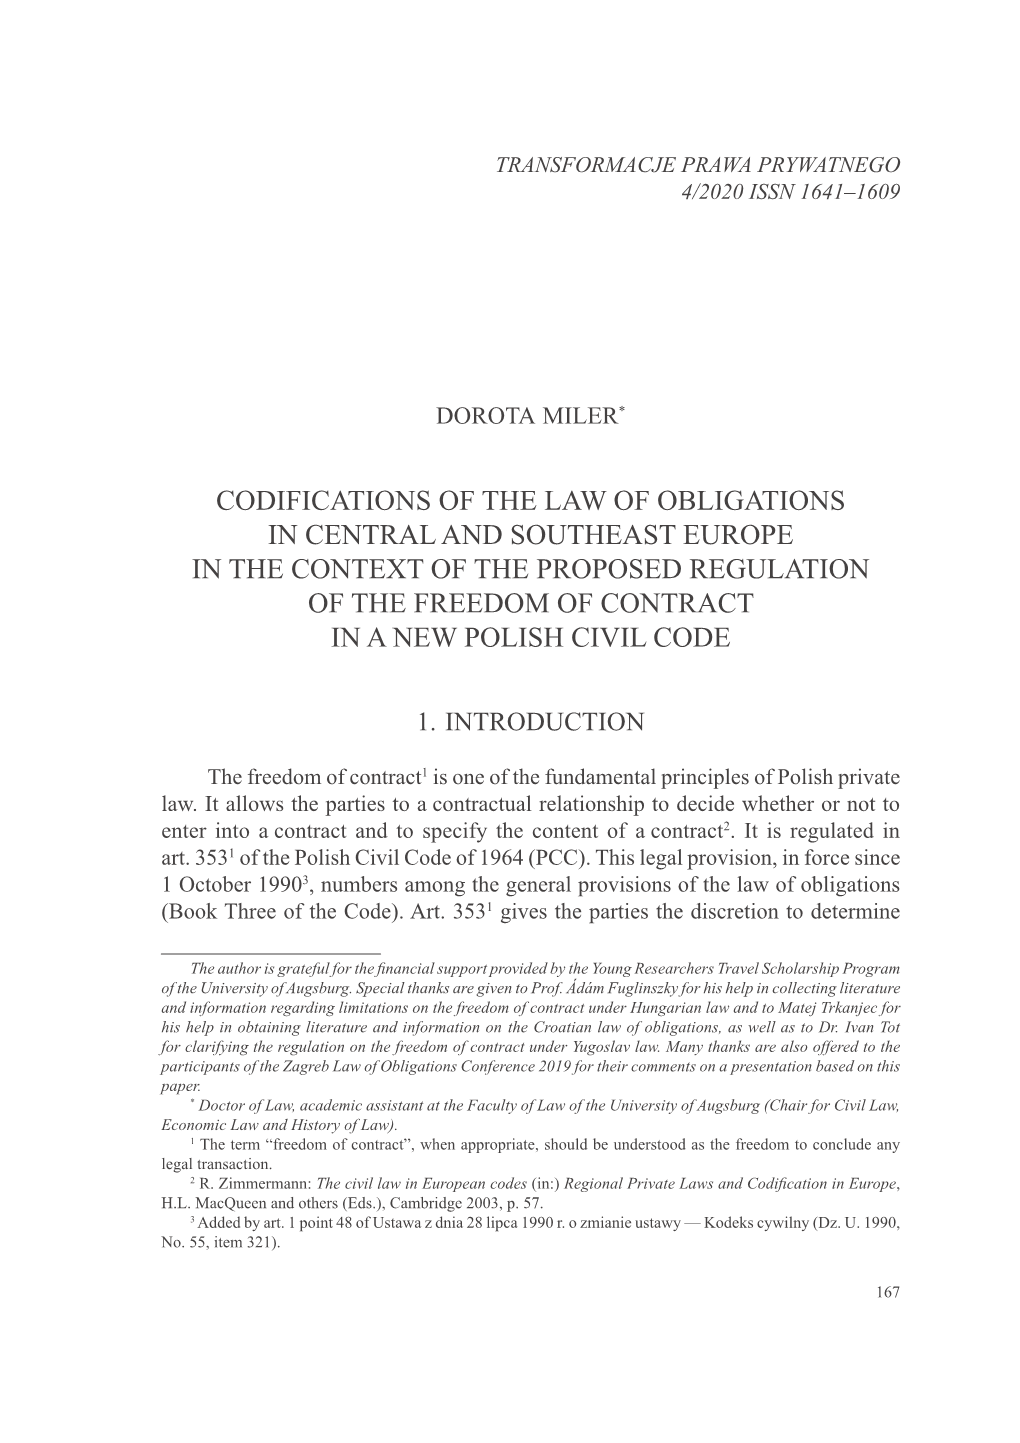 Codifications of the Law of Obligations in Central And